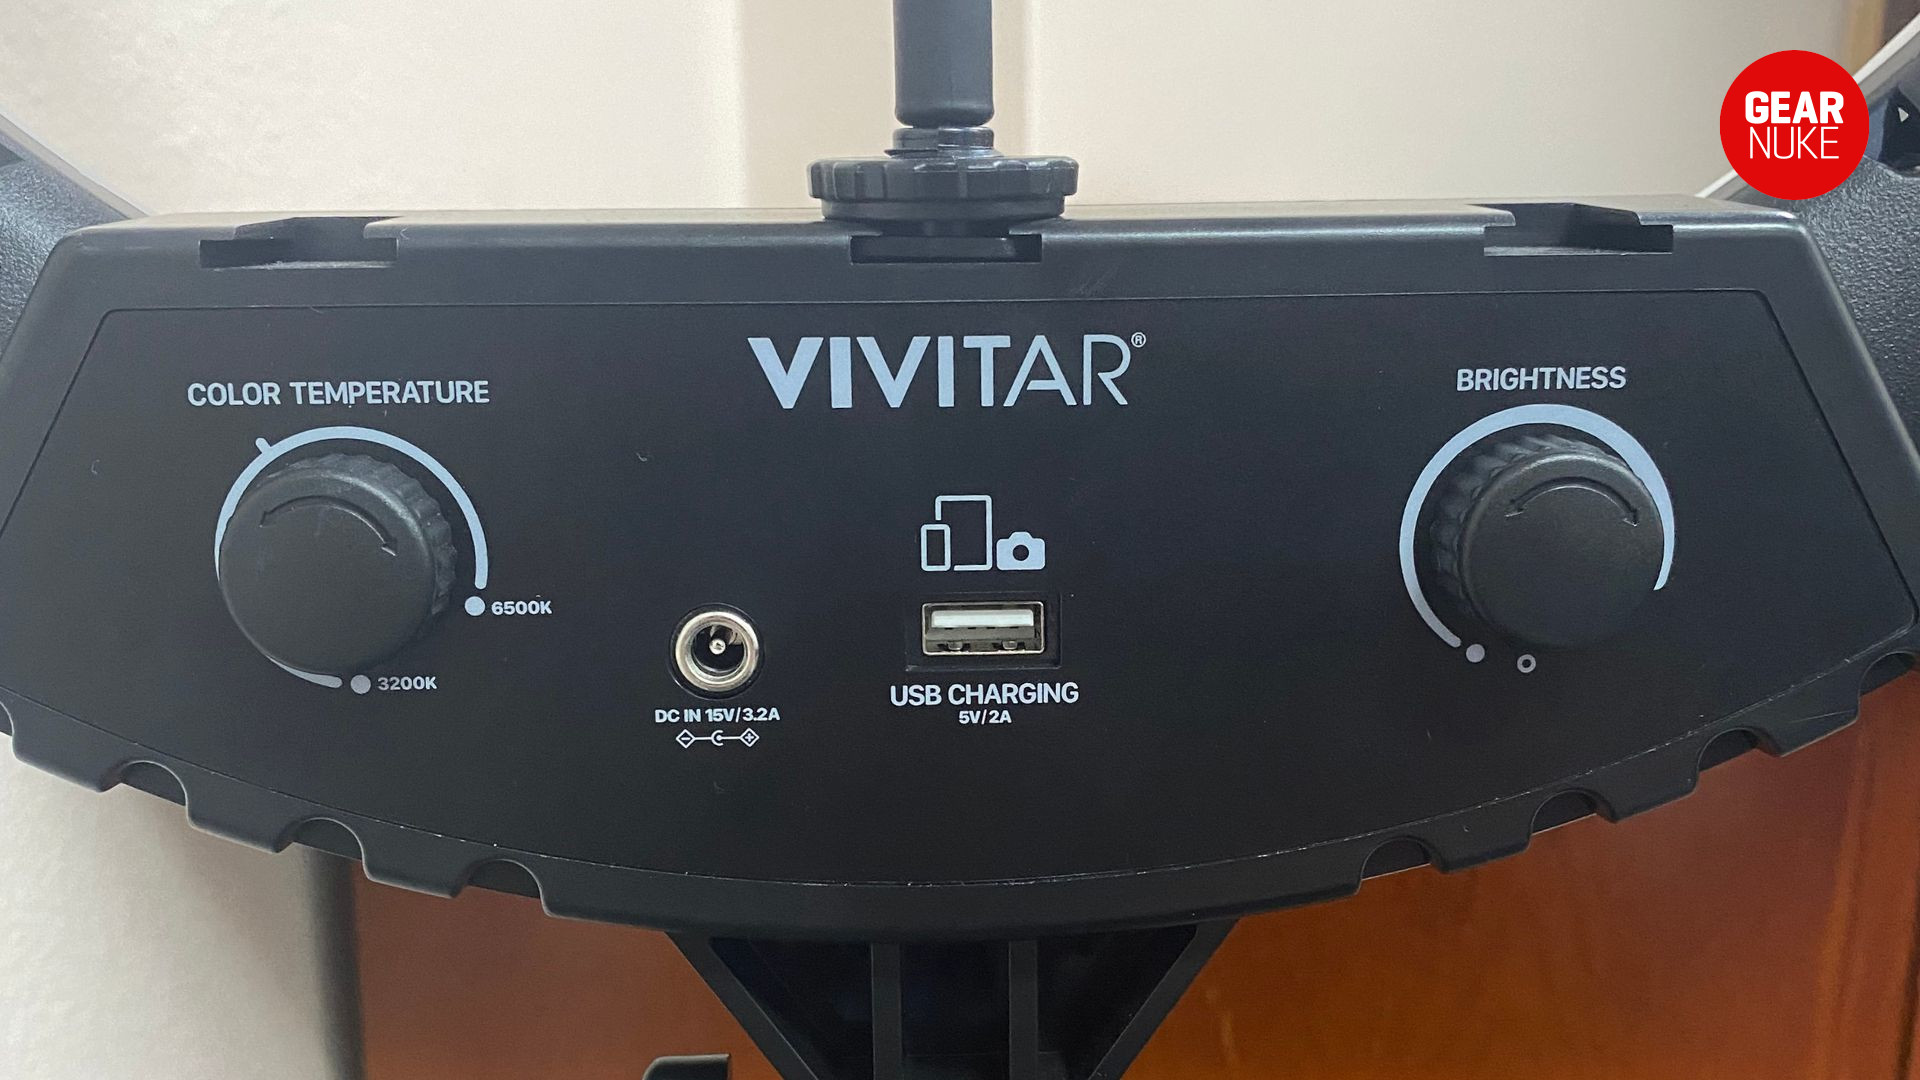 vivitar ring light review - a close up image of the ring light controls